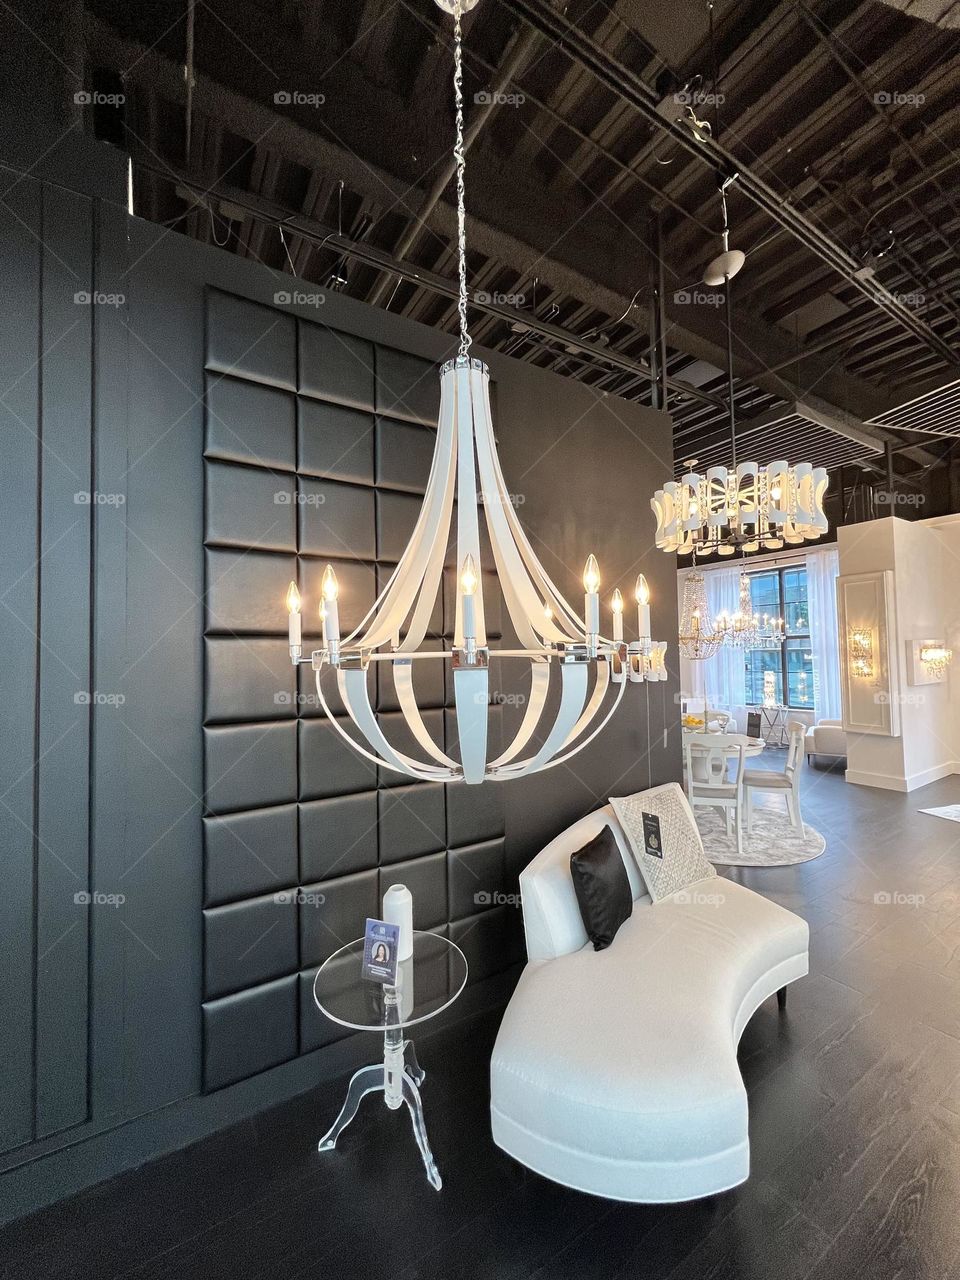 Lighting design, chandelier with white leather straps above boucle rounded setee. 